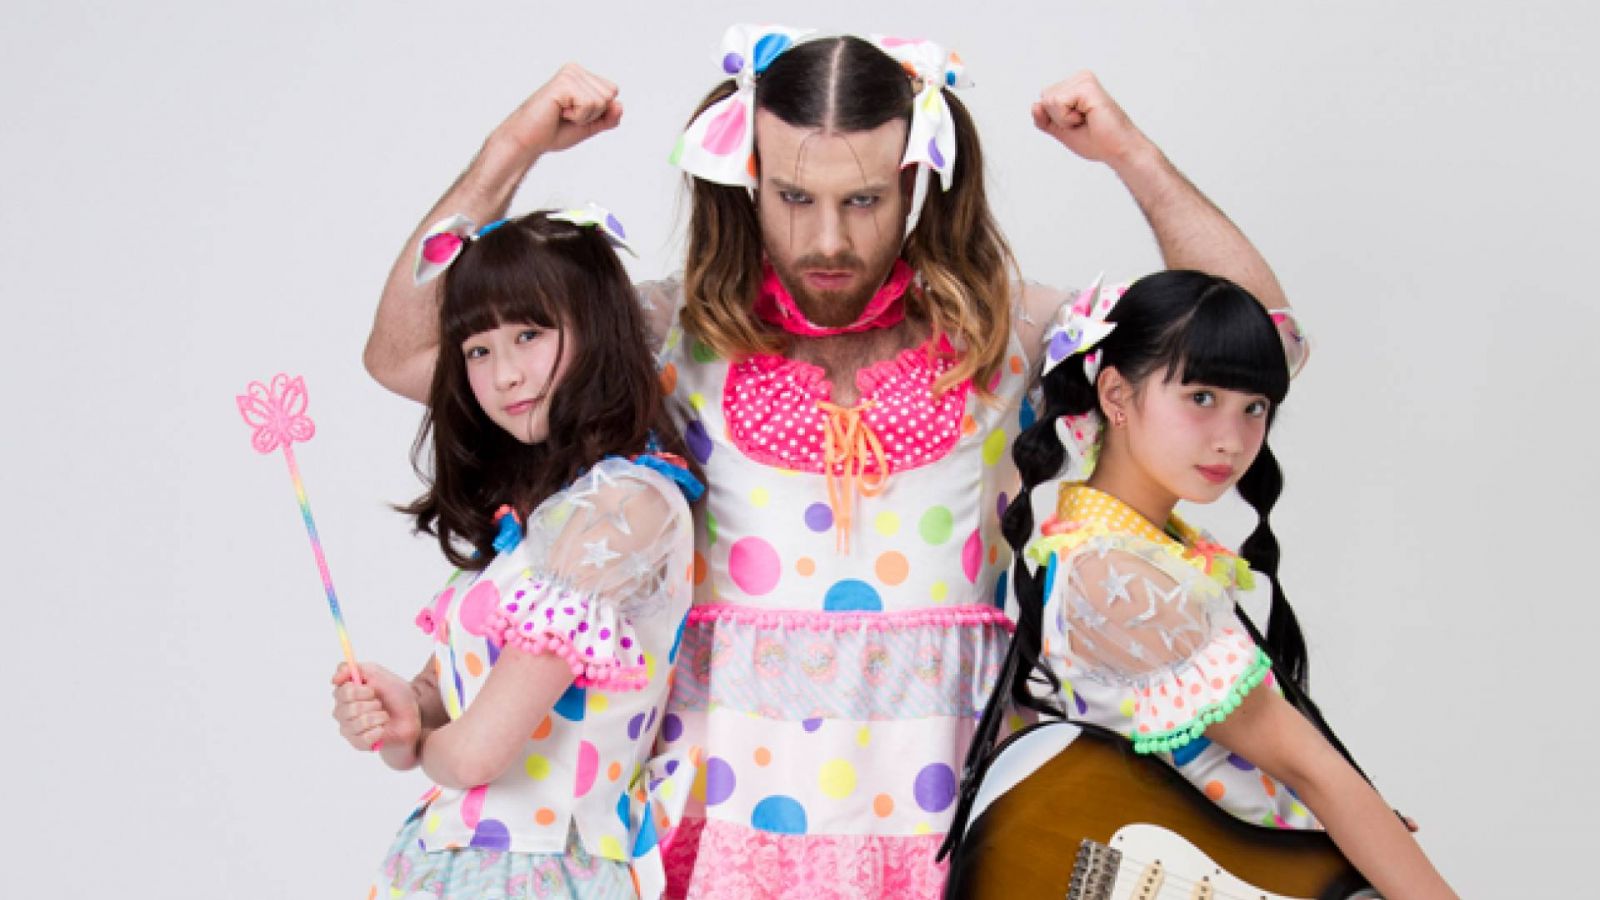 Ladybeard opuszcza LADYBABY © 2015 clearstone Co., Ltd. All rights reserved.